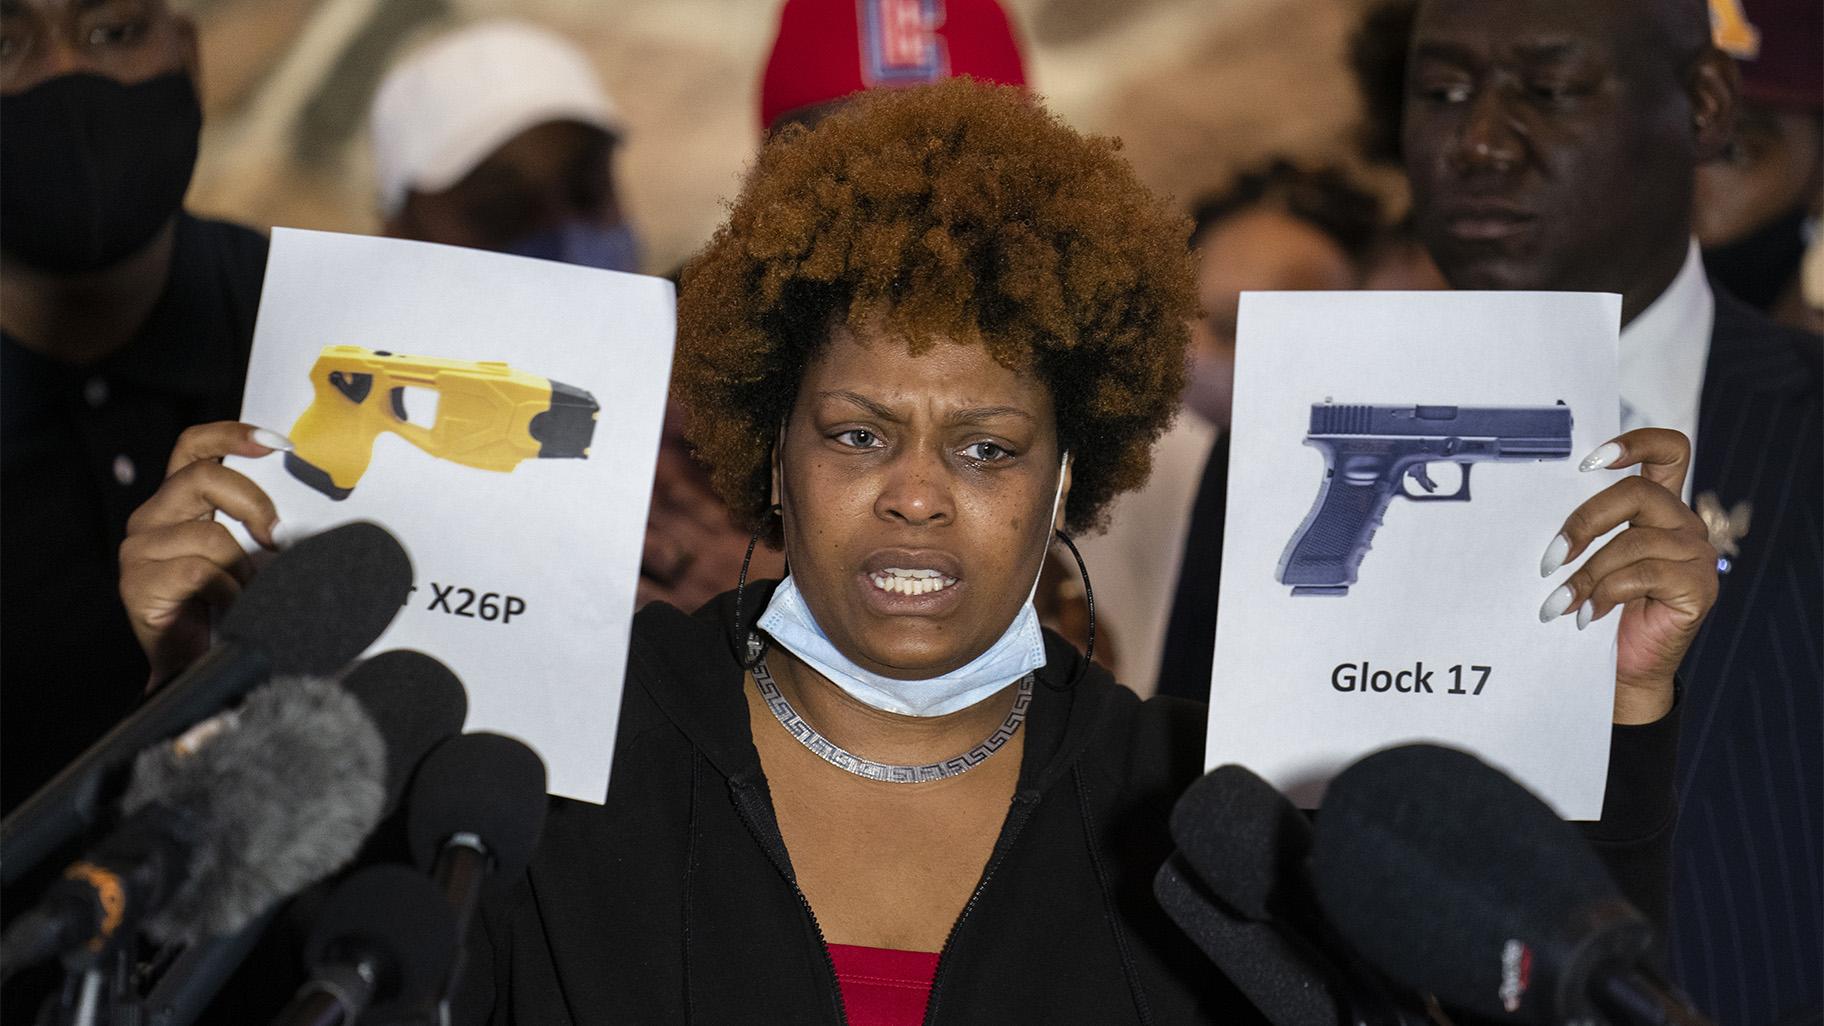 Naisha Wright, aunt of the deceased Daunte Wright, holds up images depicting X26P Taser and a Glock 17 handgun during a news conference at New Salem Missionary Baptist Church, Thursday, April 15, 2021, in Minneapolis. (AP Photo / John Minchillo)